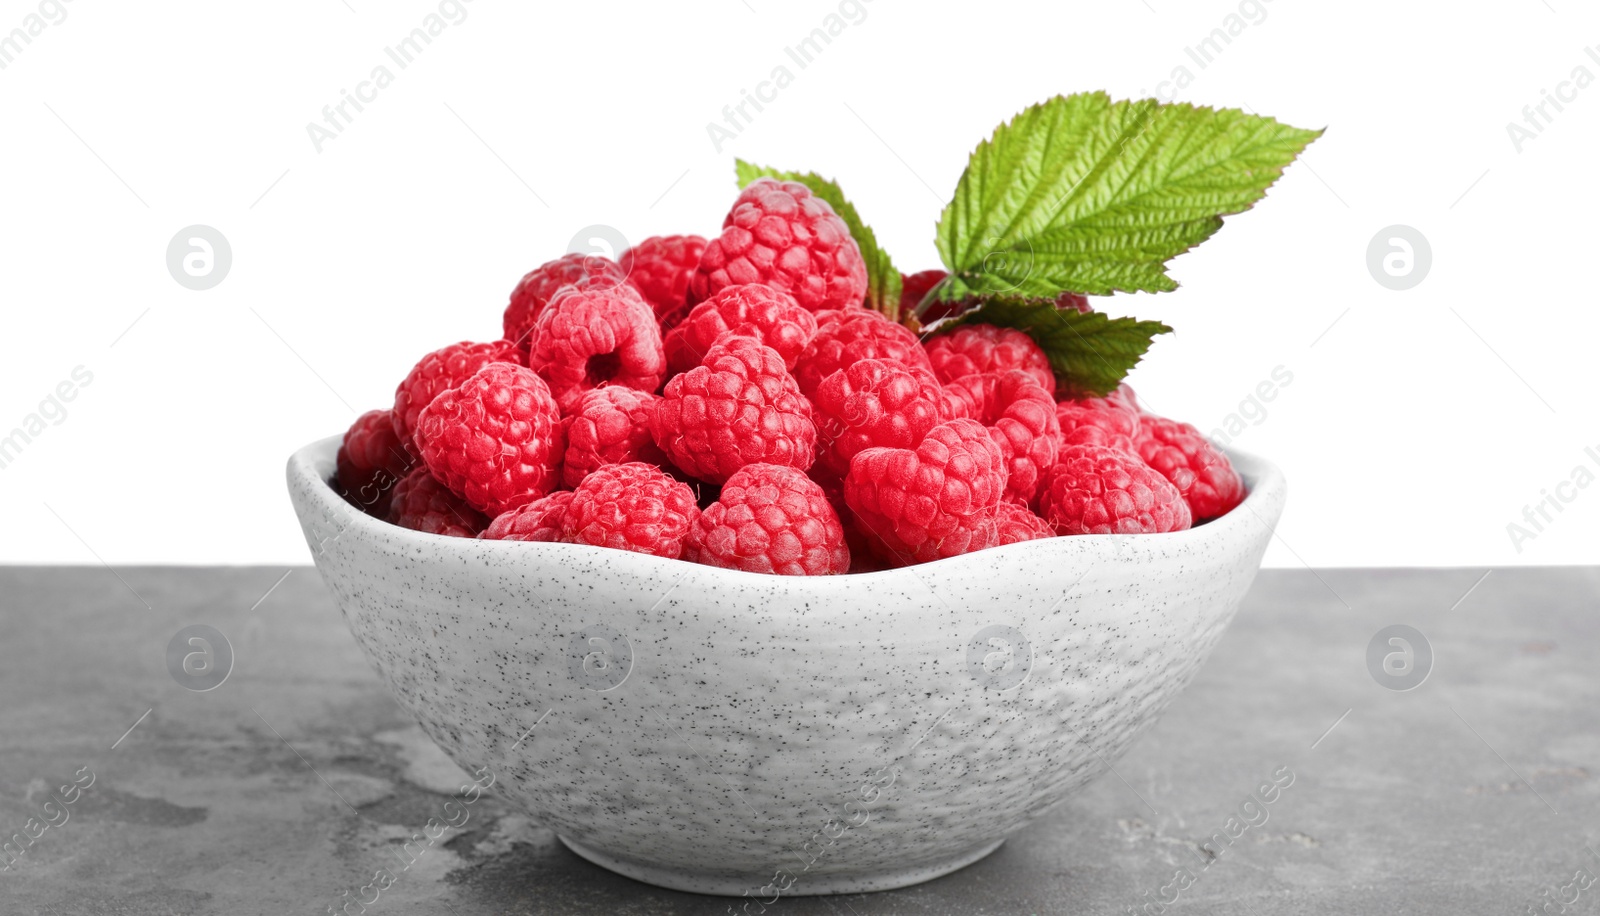 Photo of Bowl of fresh ripe raspberries with green leaves on grey table against white background